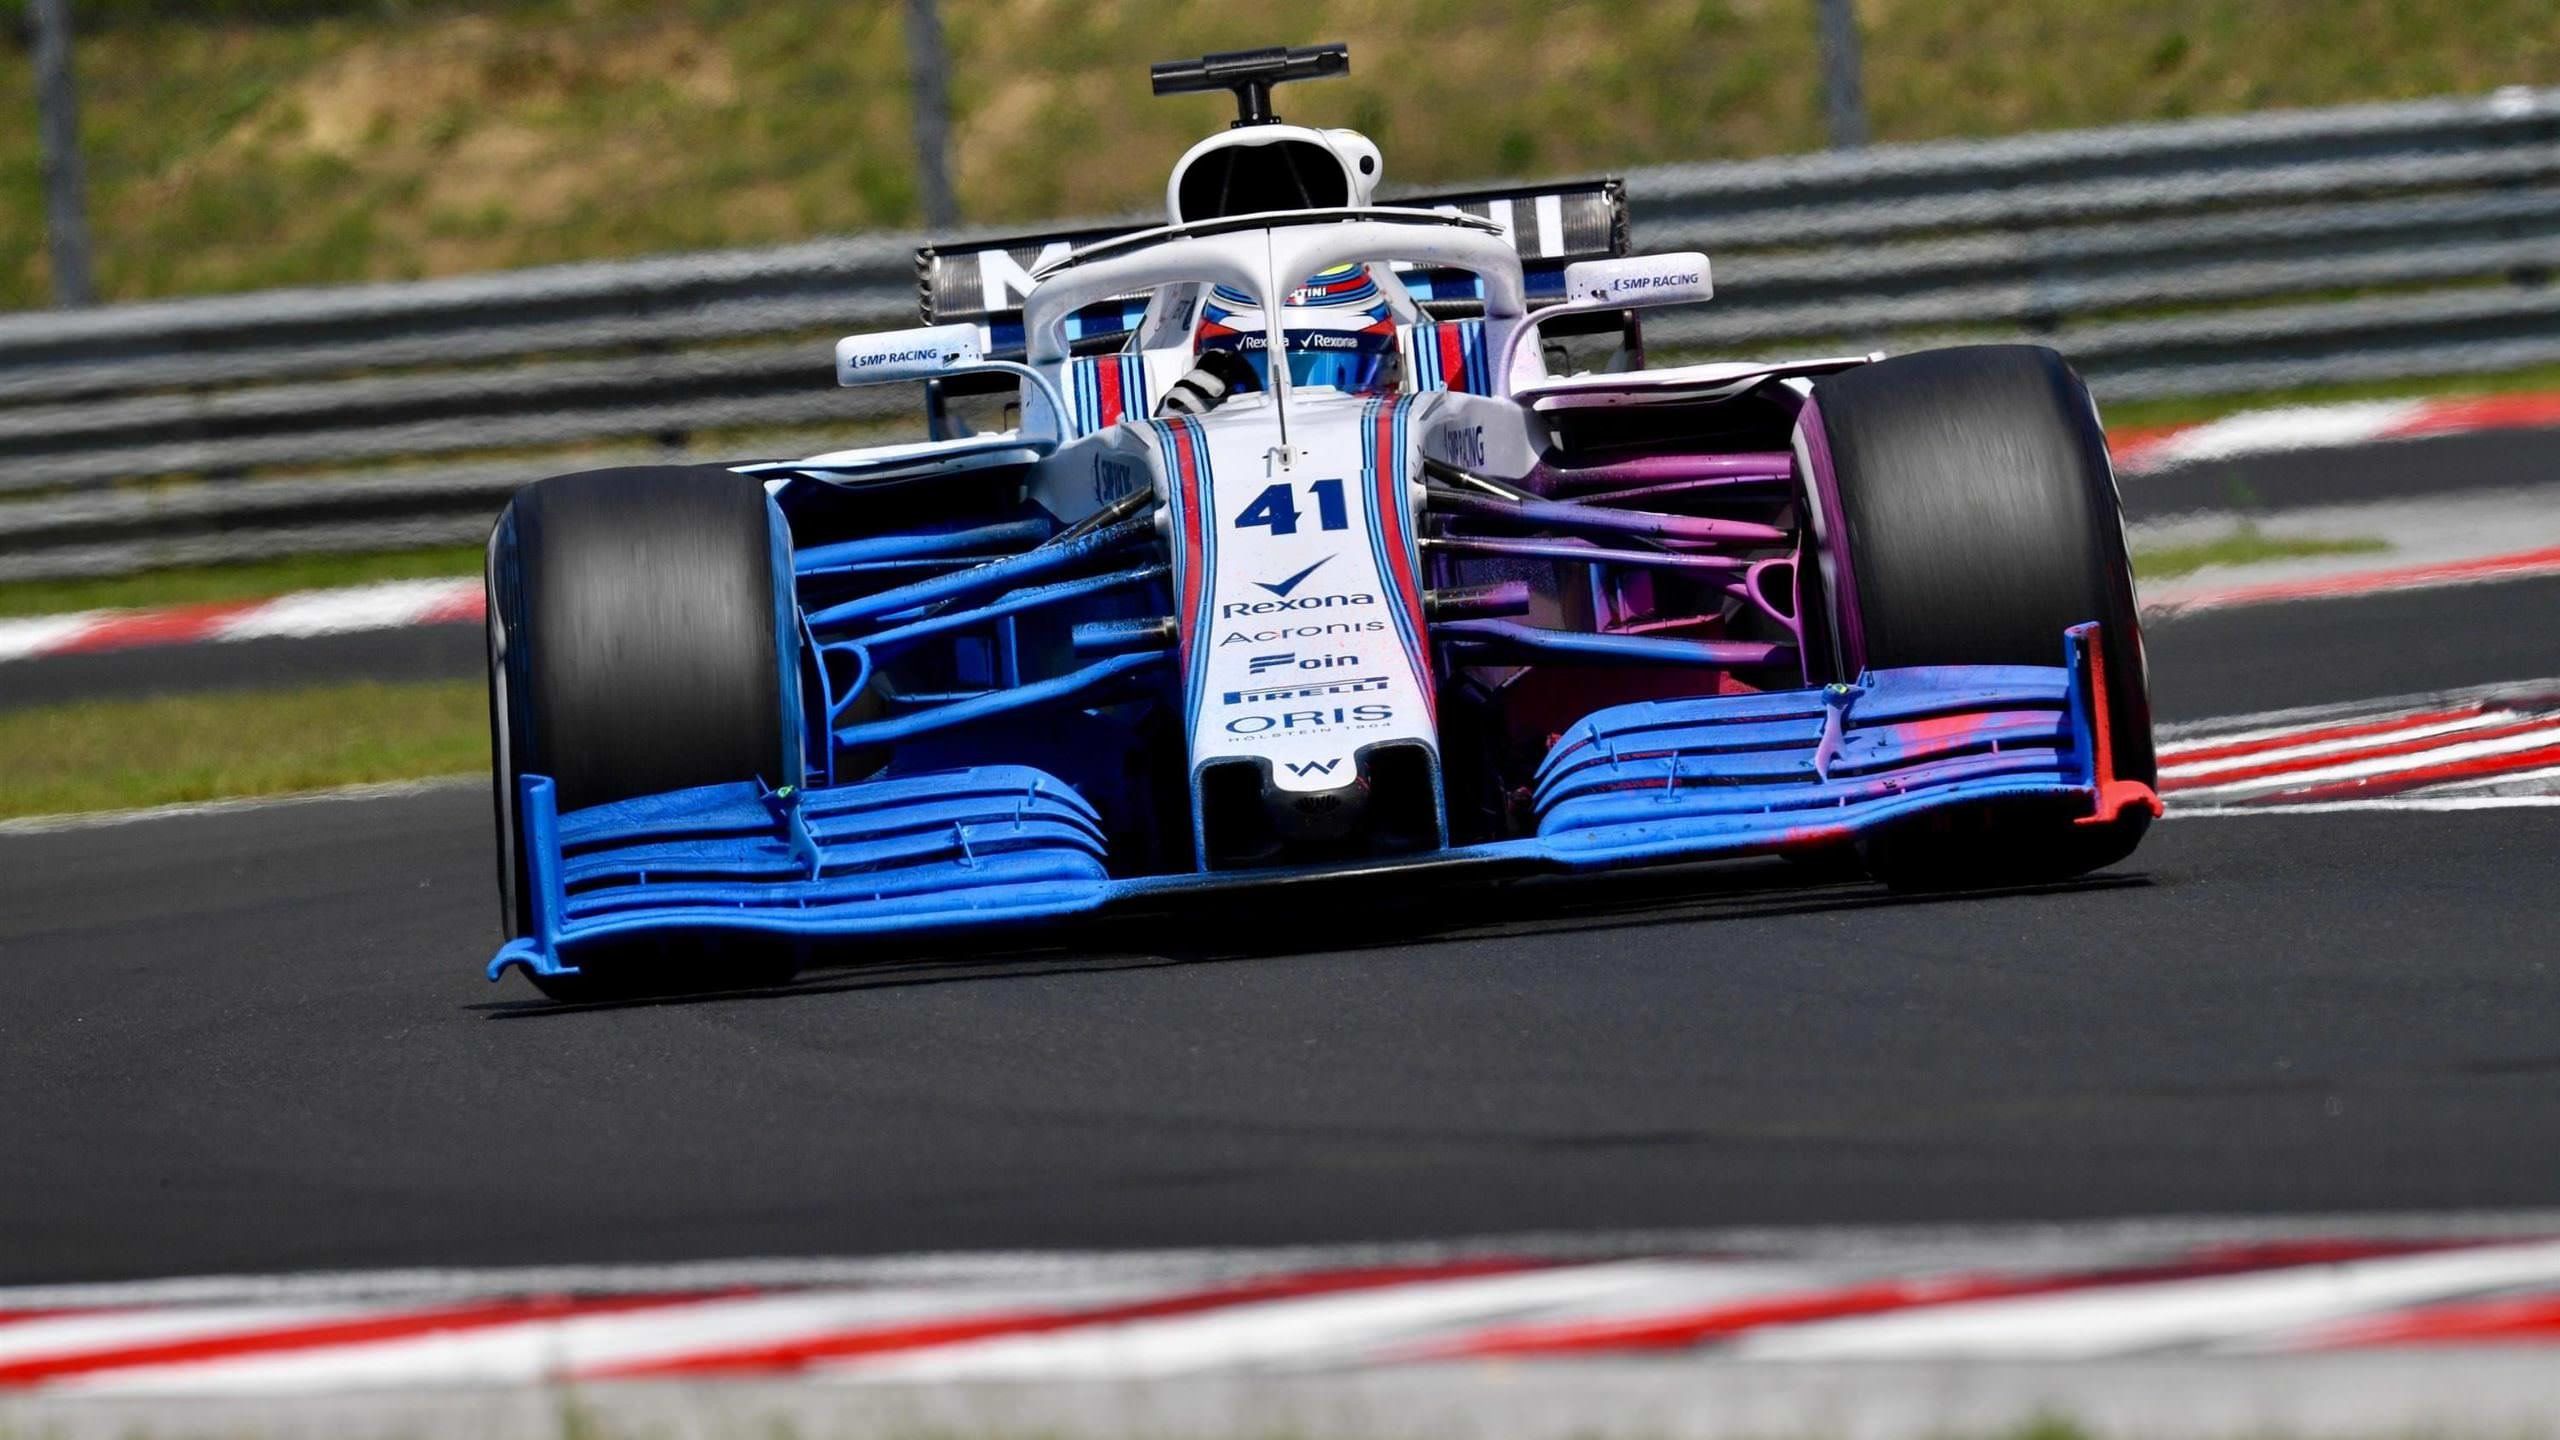 Williams 4K wallpaper for your desktop or mobile screen free and easy to download